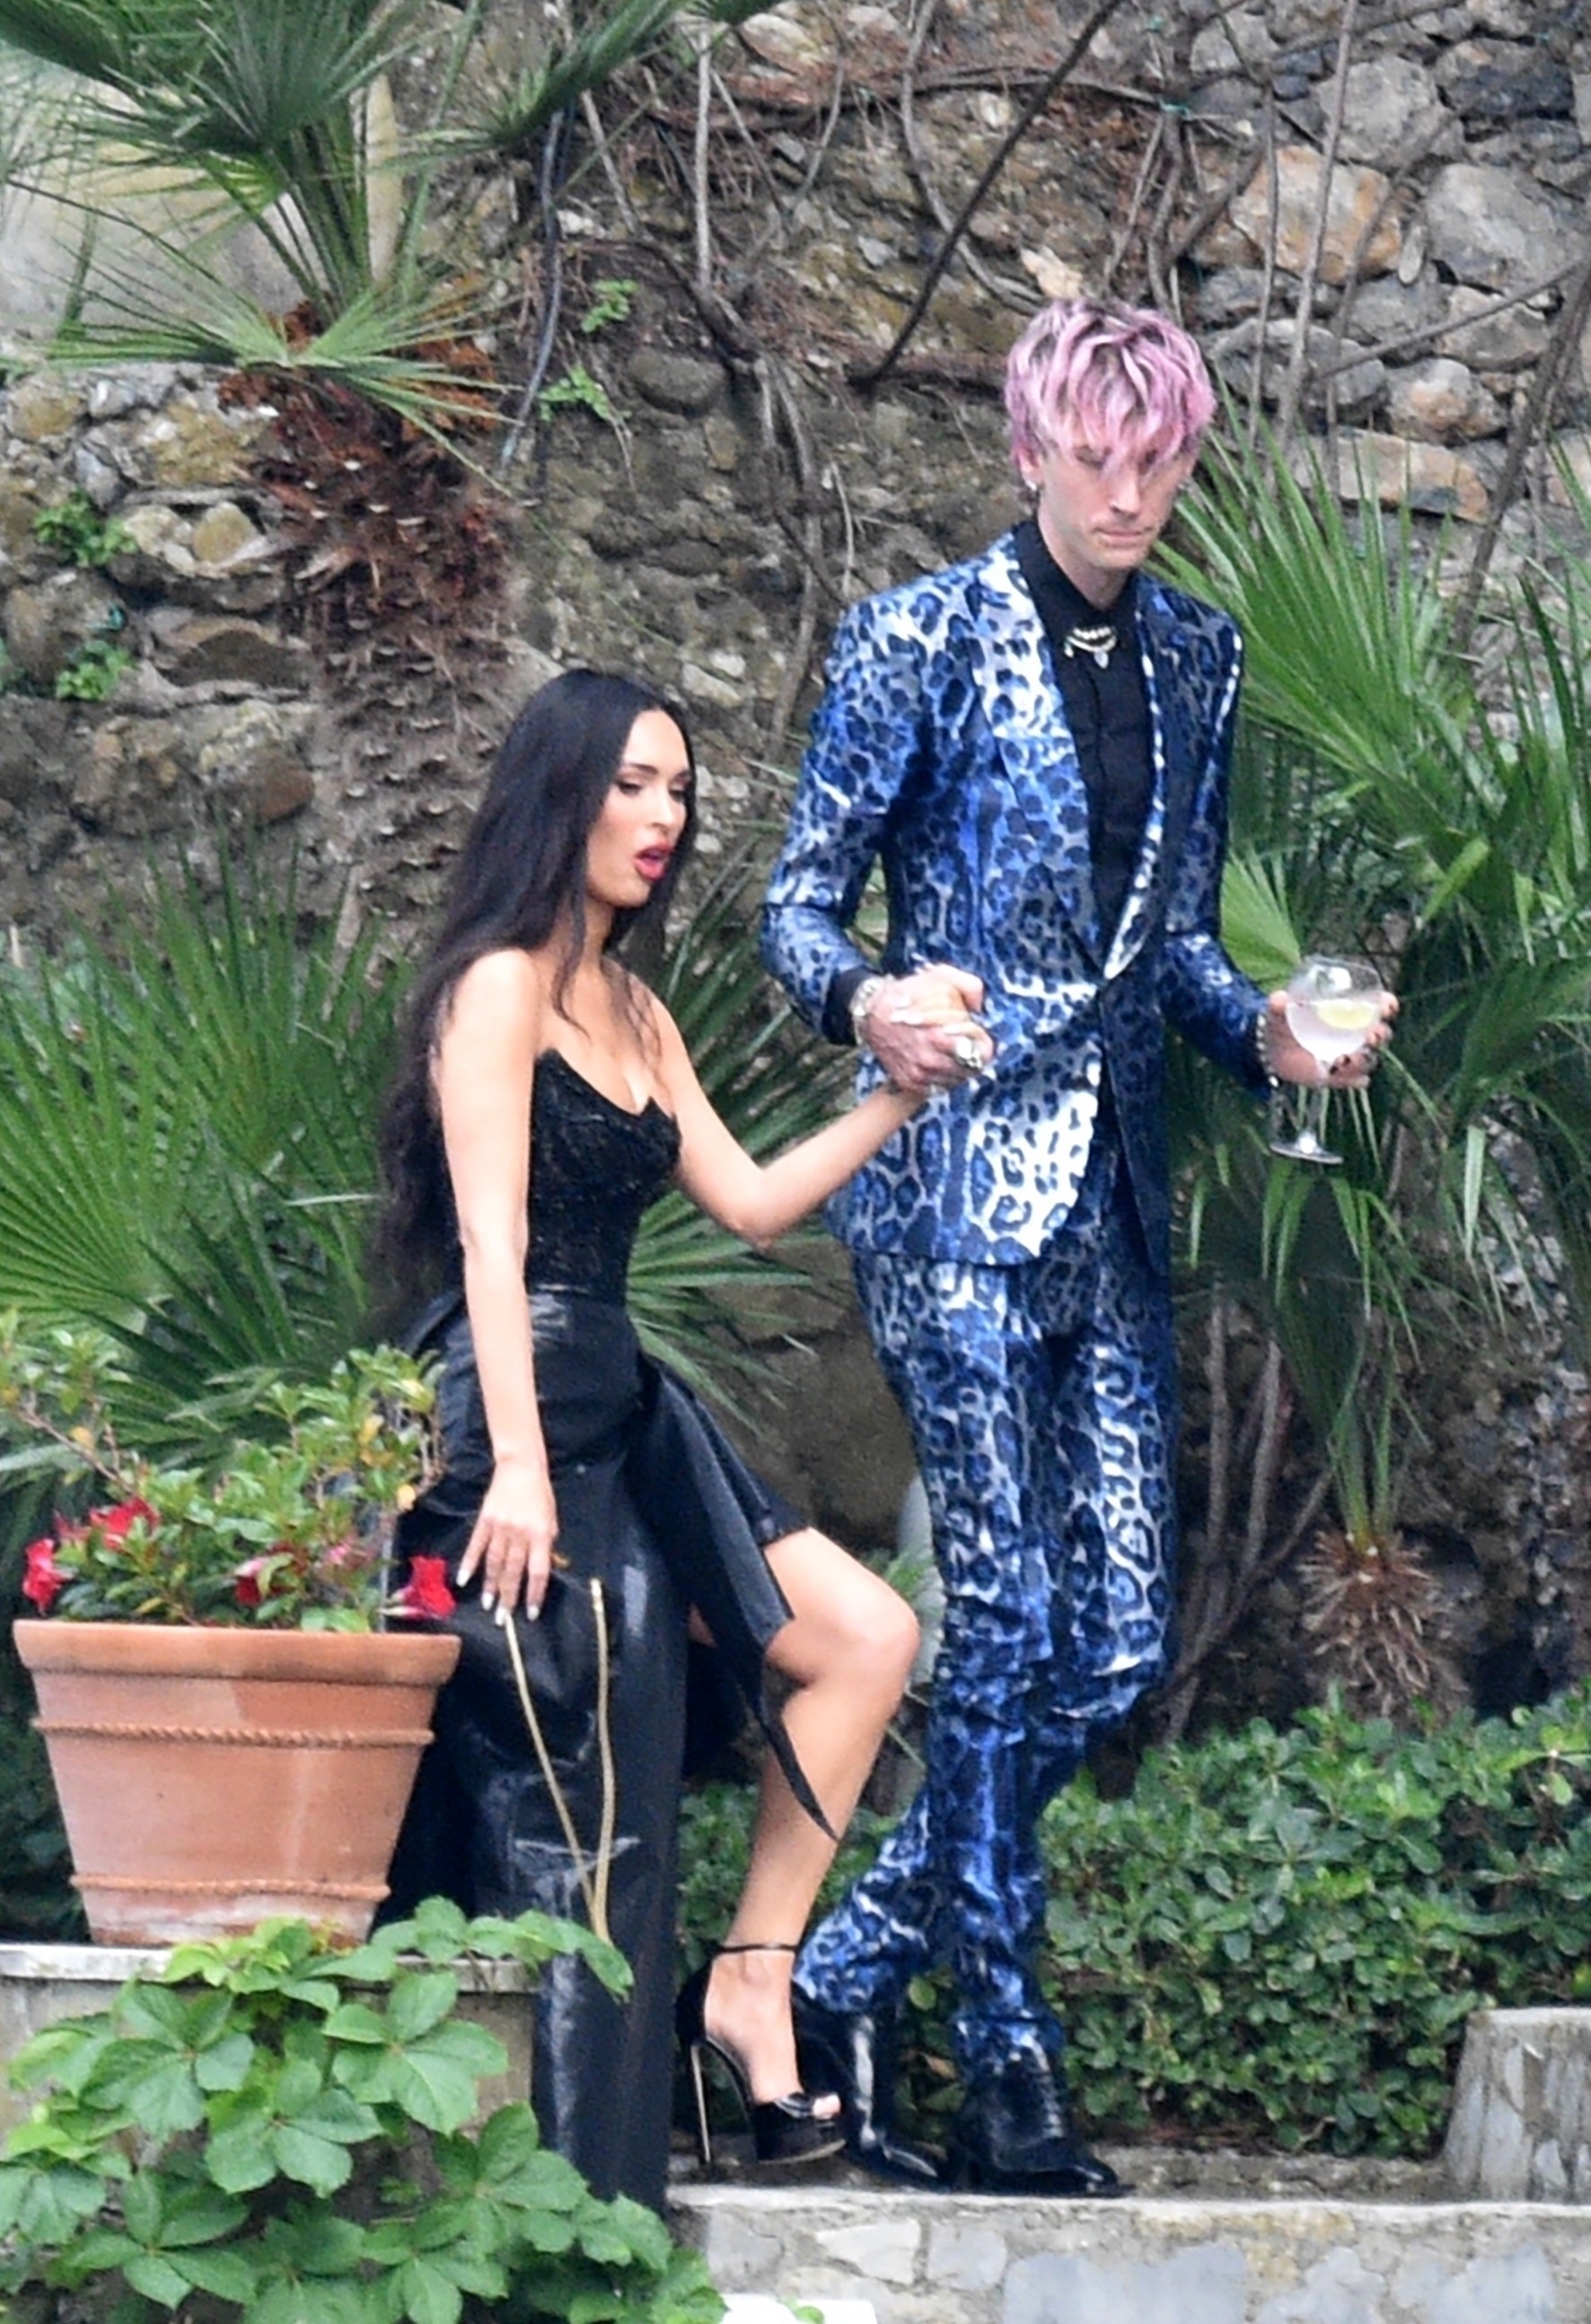 Megan and MGK walking into the wedding together; MGK is wearing a blue leopard print suit